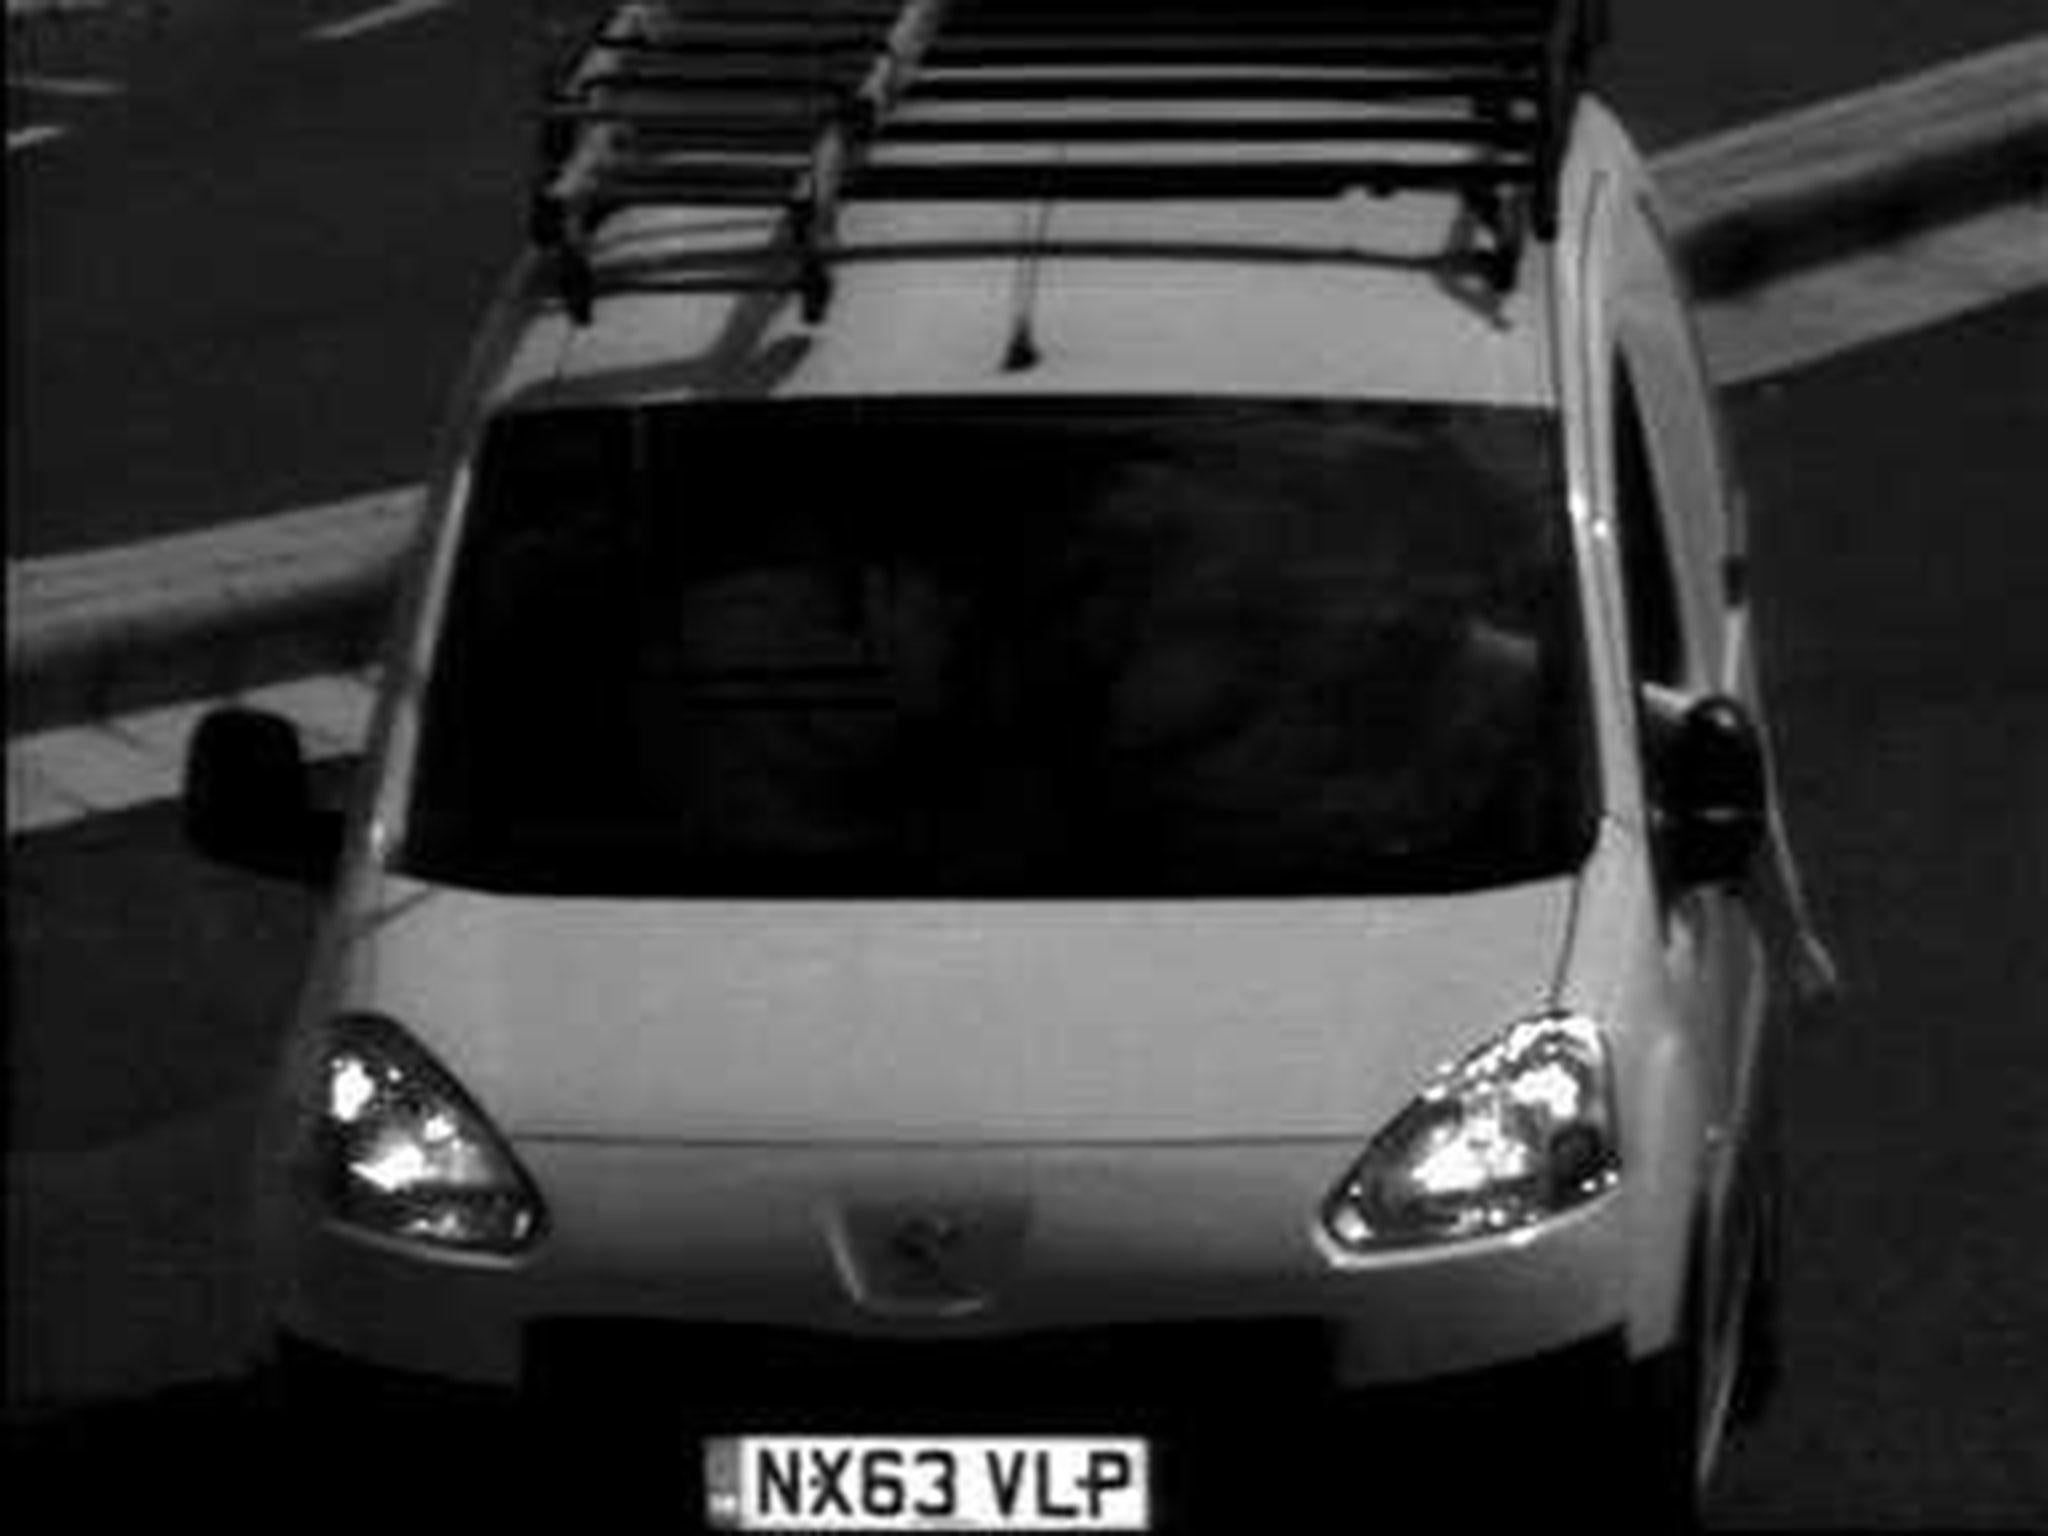 Surrey Police are appealing for information about the drivers of this Peugeot Partner van, registration NX63 VLP